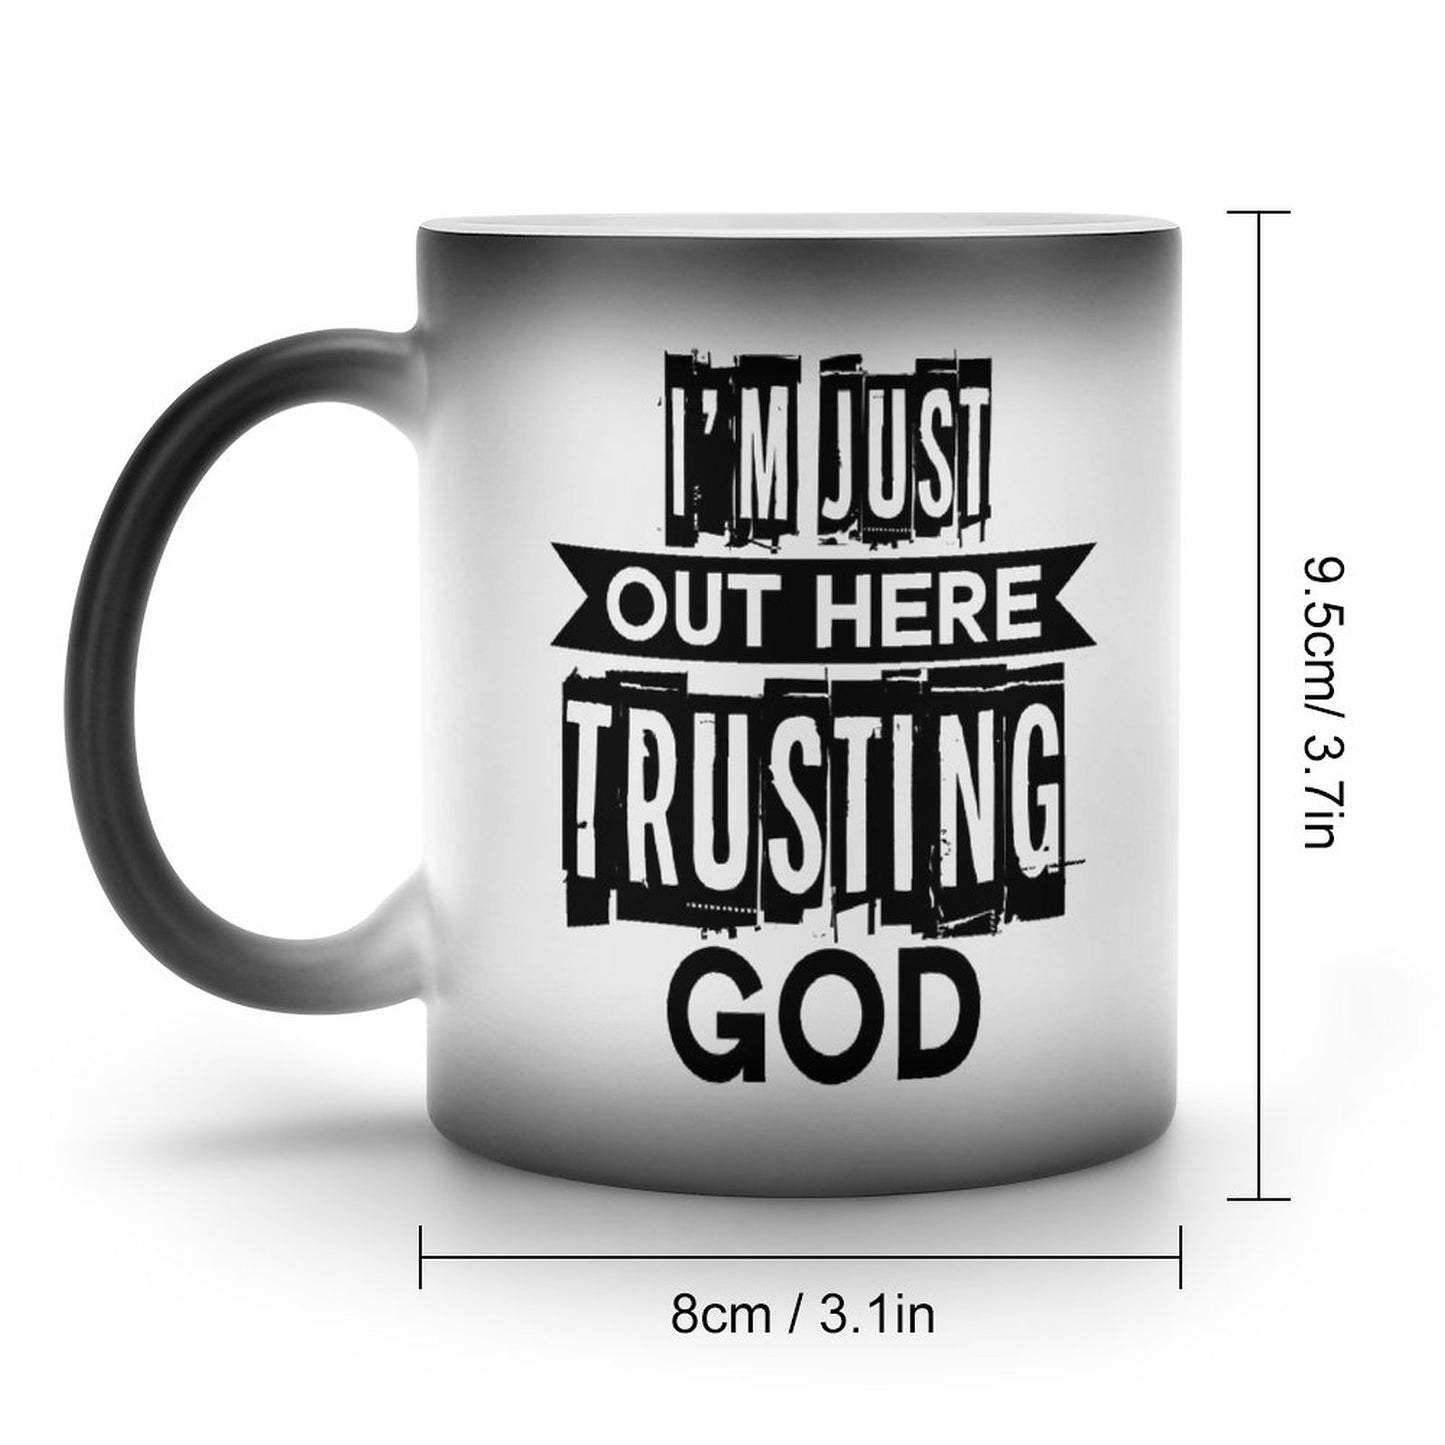 I'm Just Out Here Trusting God Christian Color Changing Mug (Dual-sided)